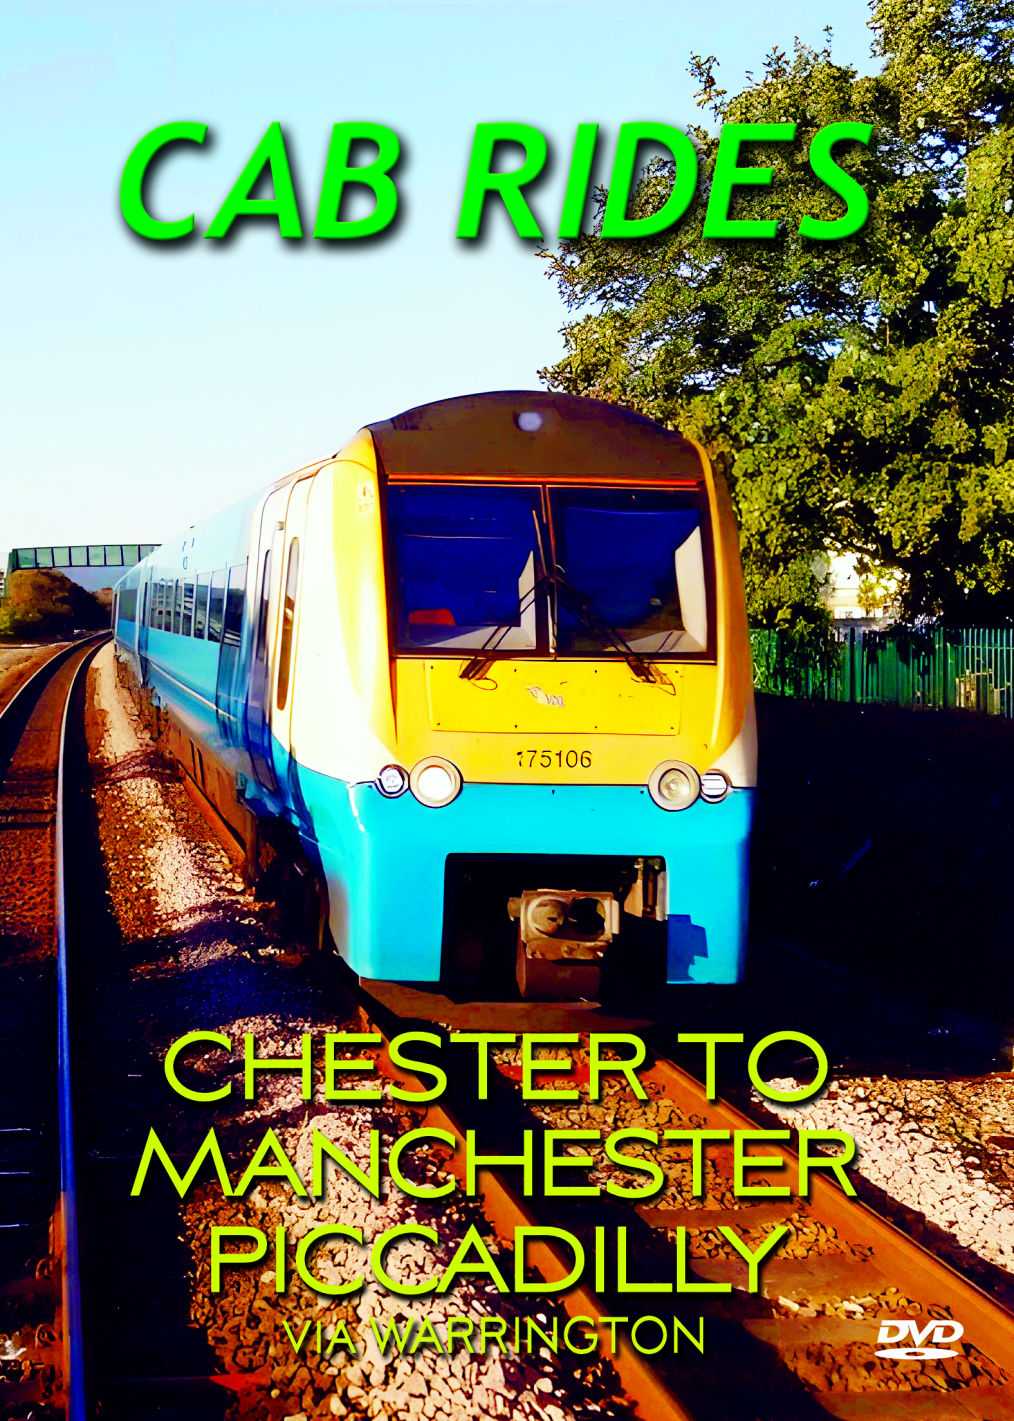 Cab Ride Chester to Manchester Piccadilly